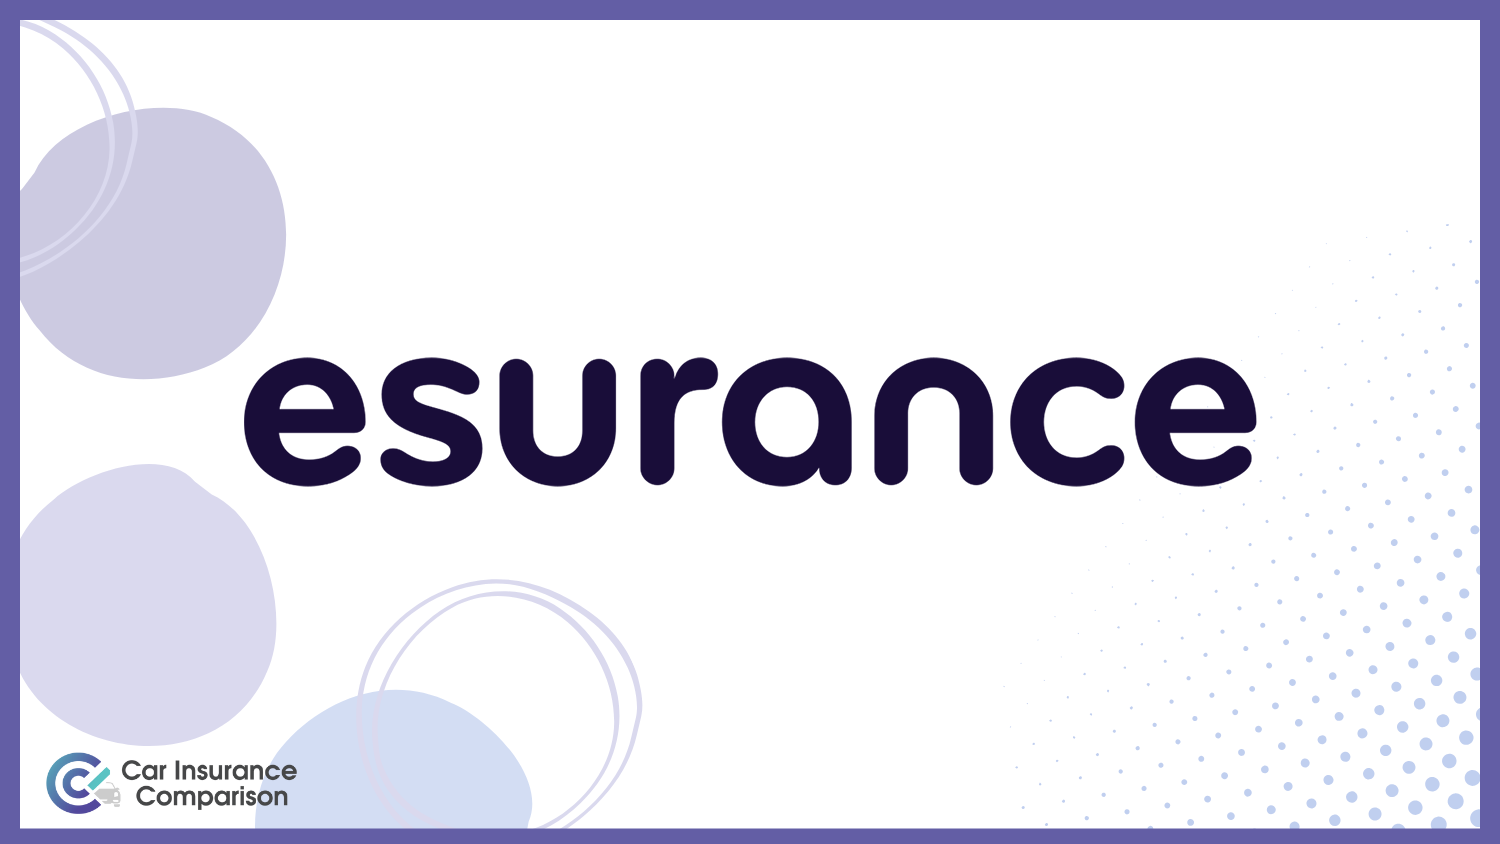 Esurance: Best Car Insurance for Multiple Accidents